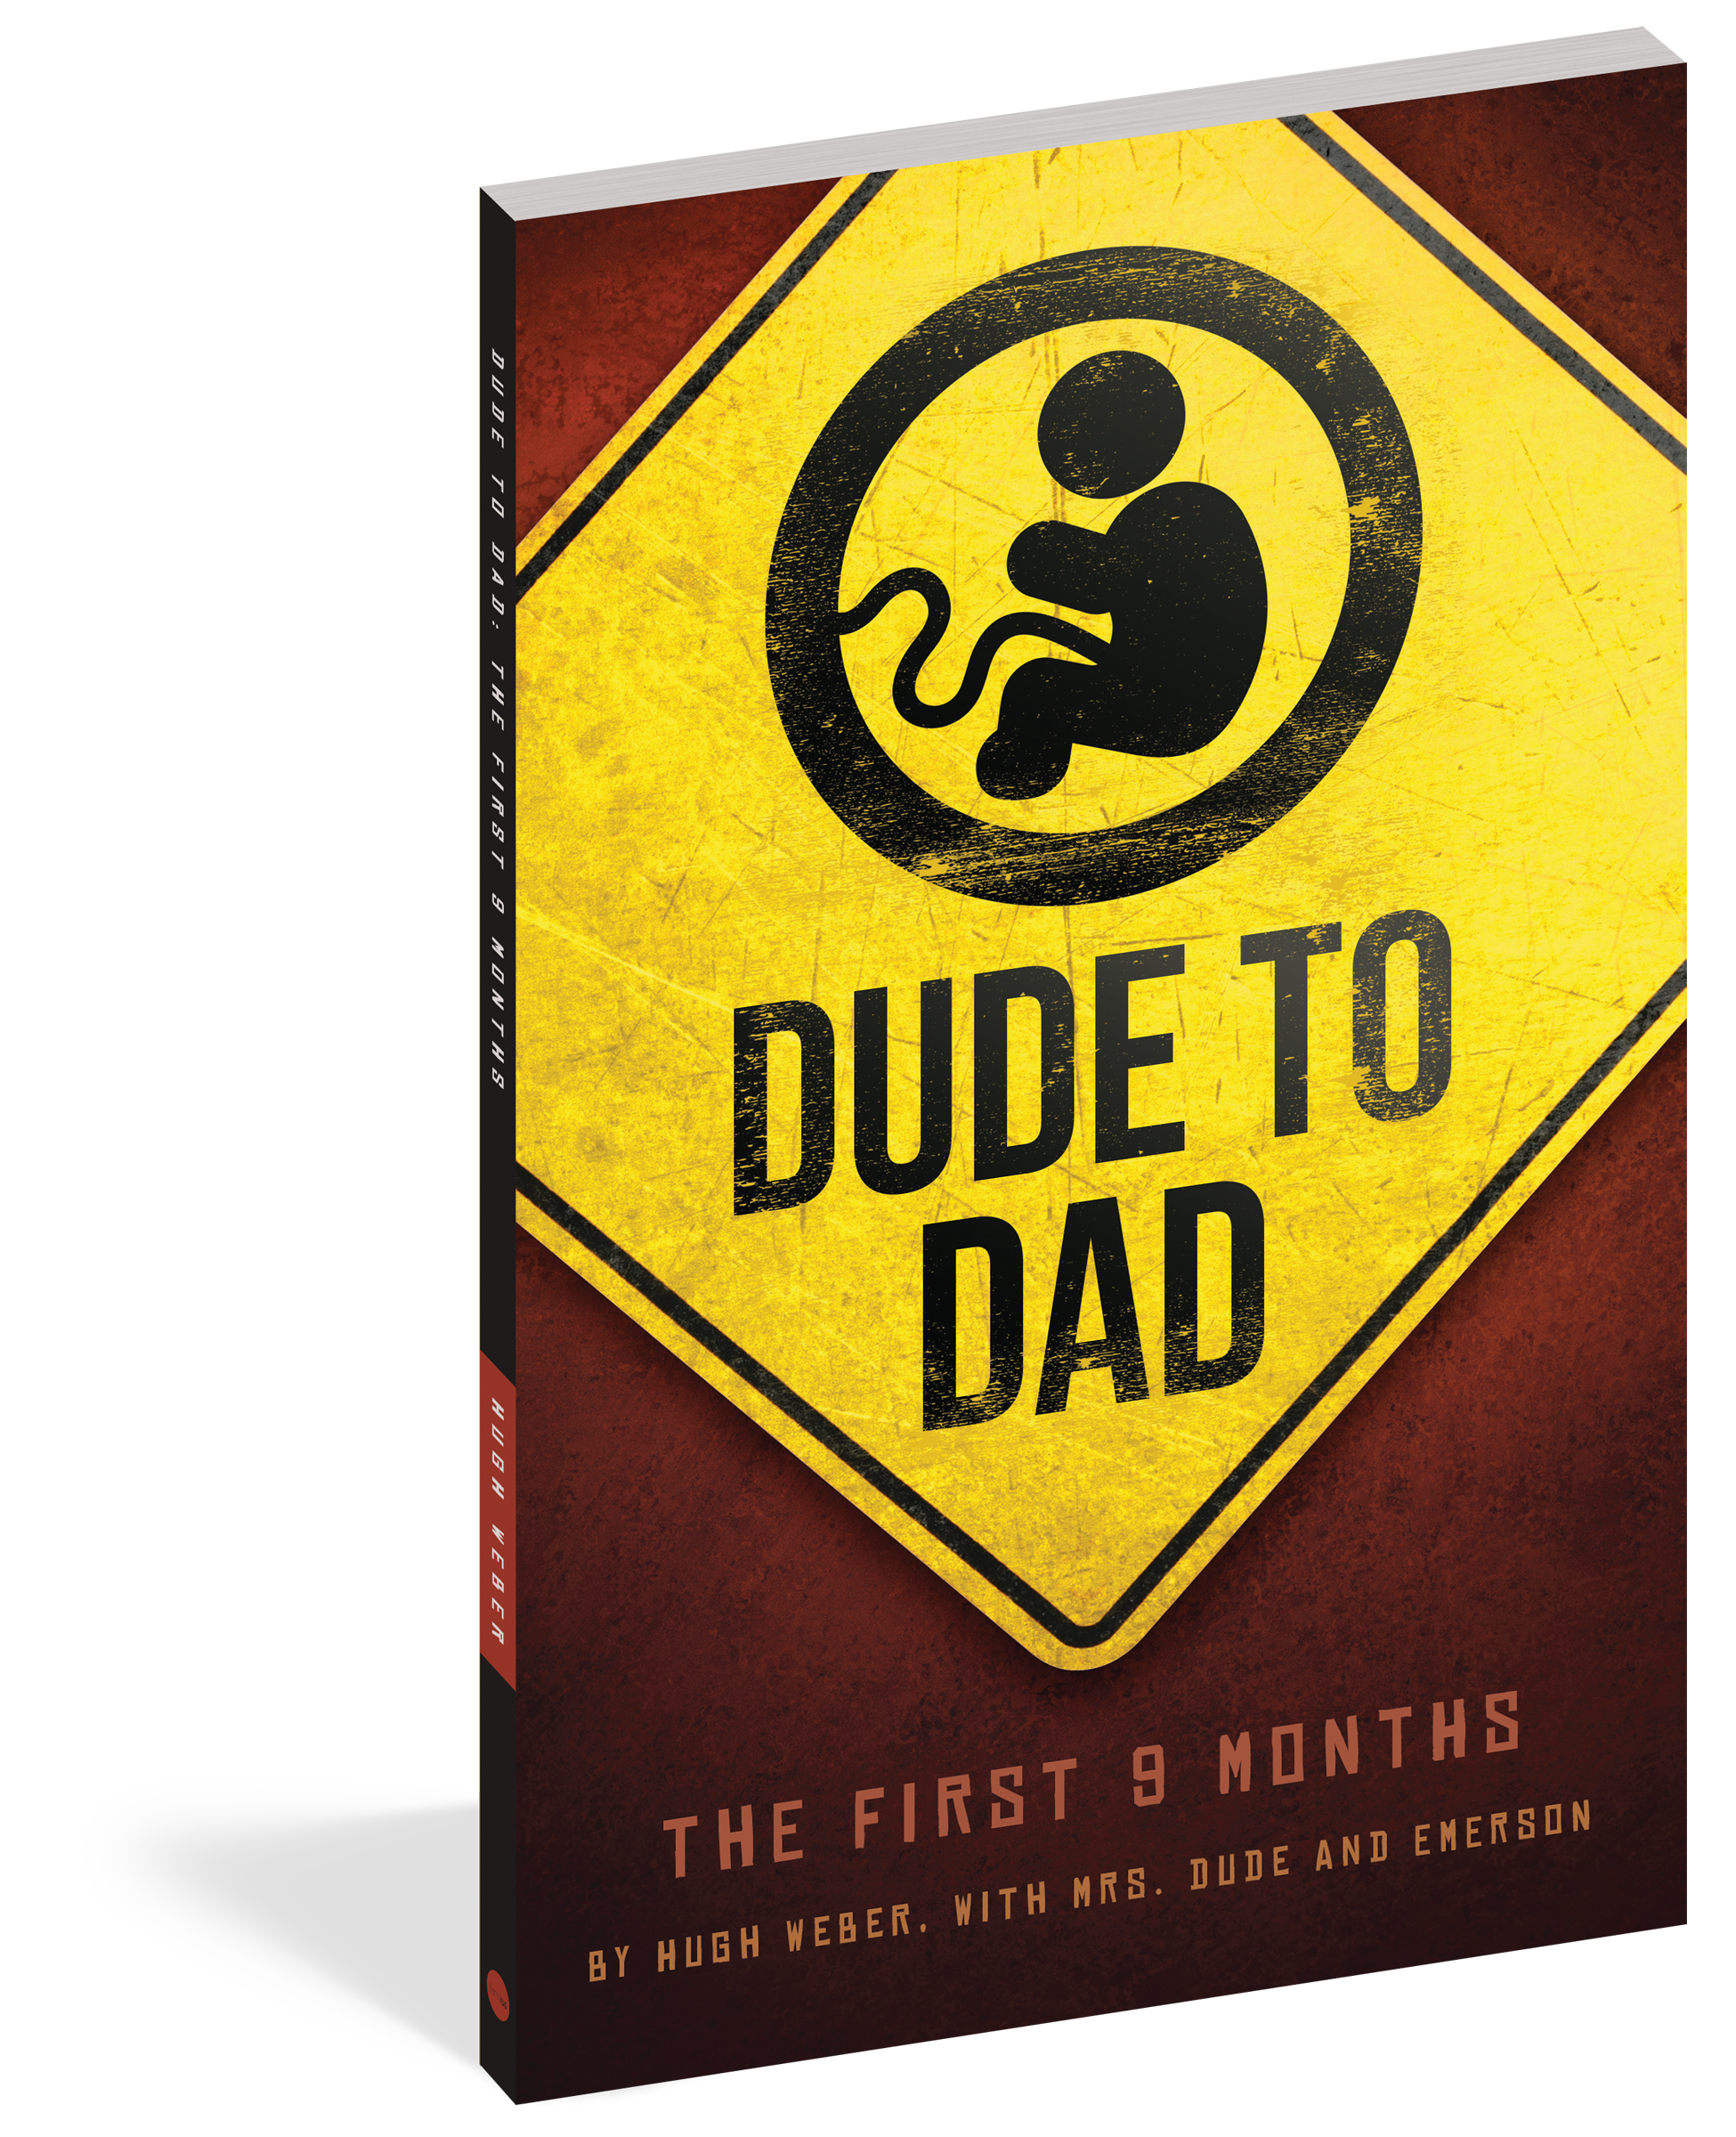 The cover of the book Dude to Dad.